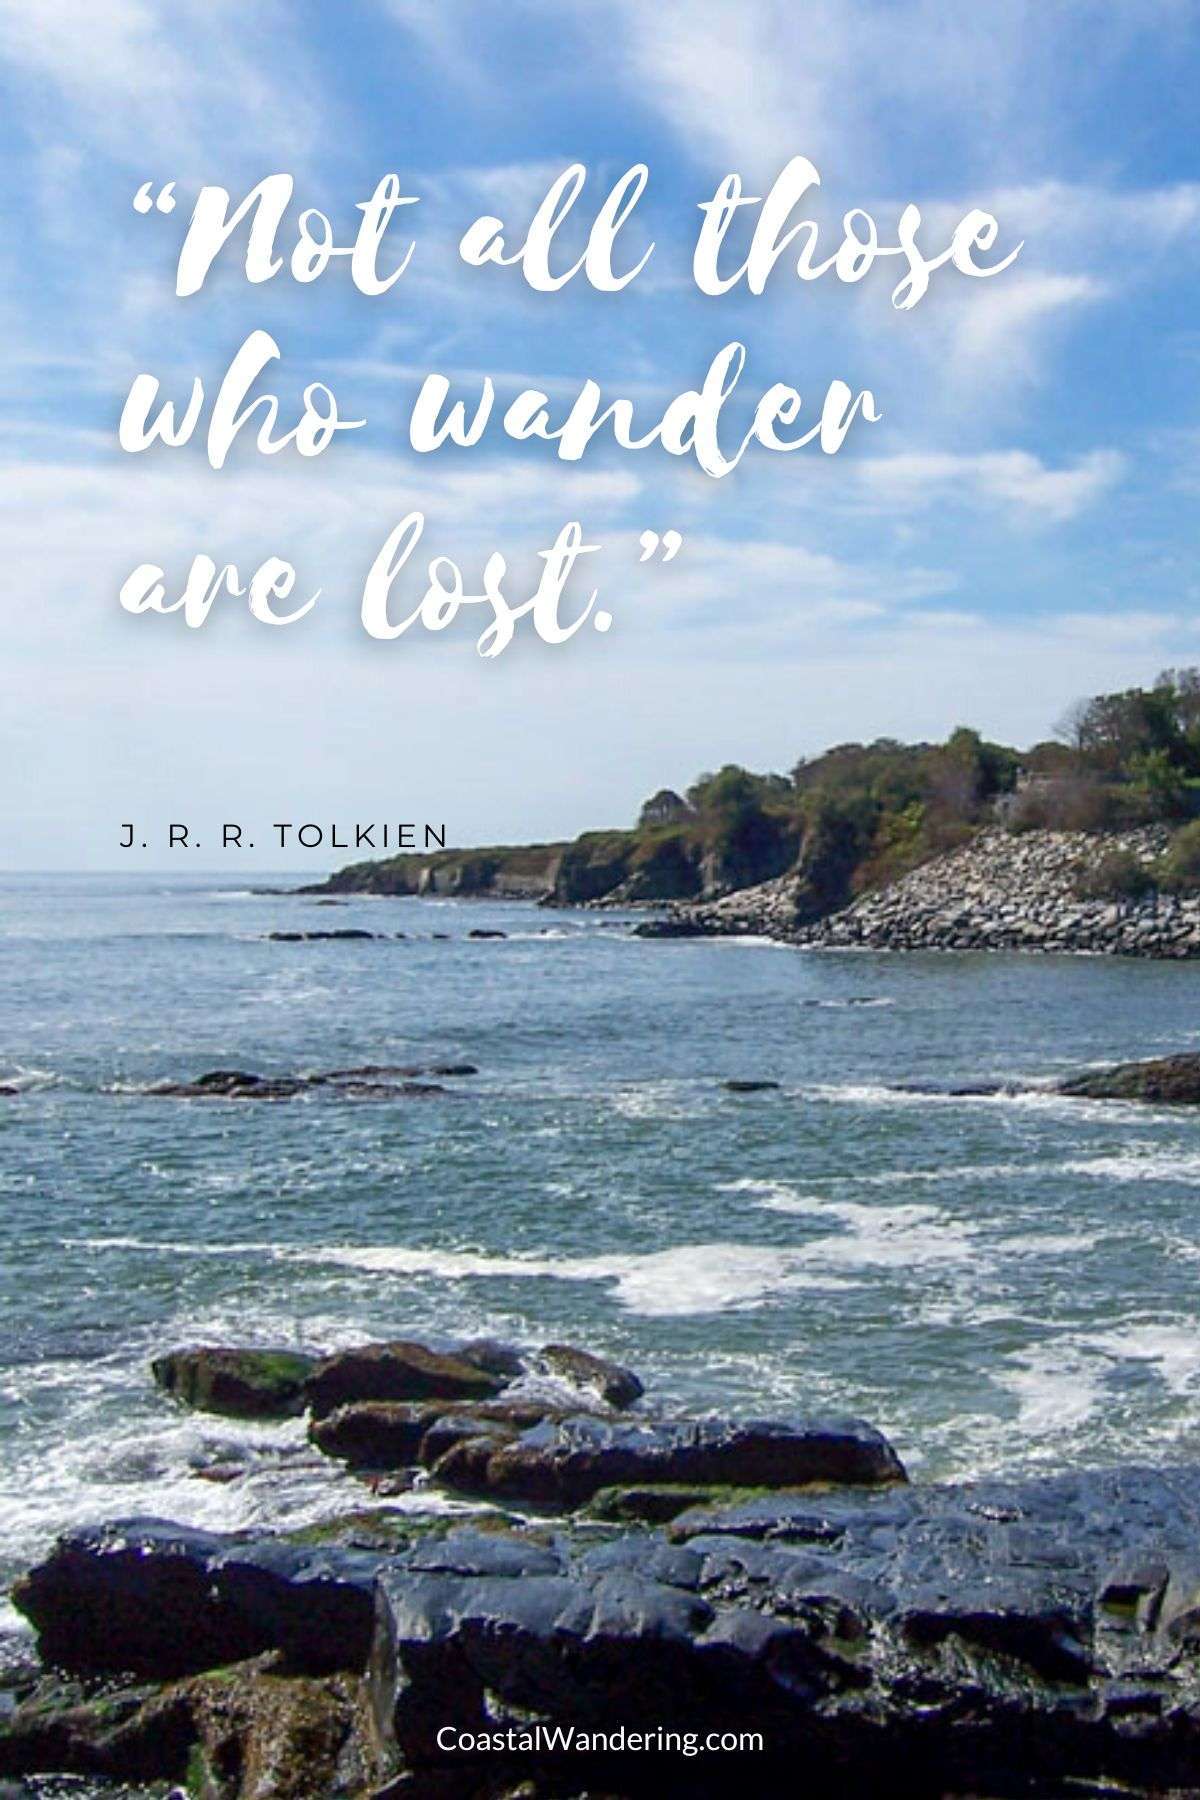 “Not all those who wander are lost.” - J. R. R. Tolkien